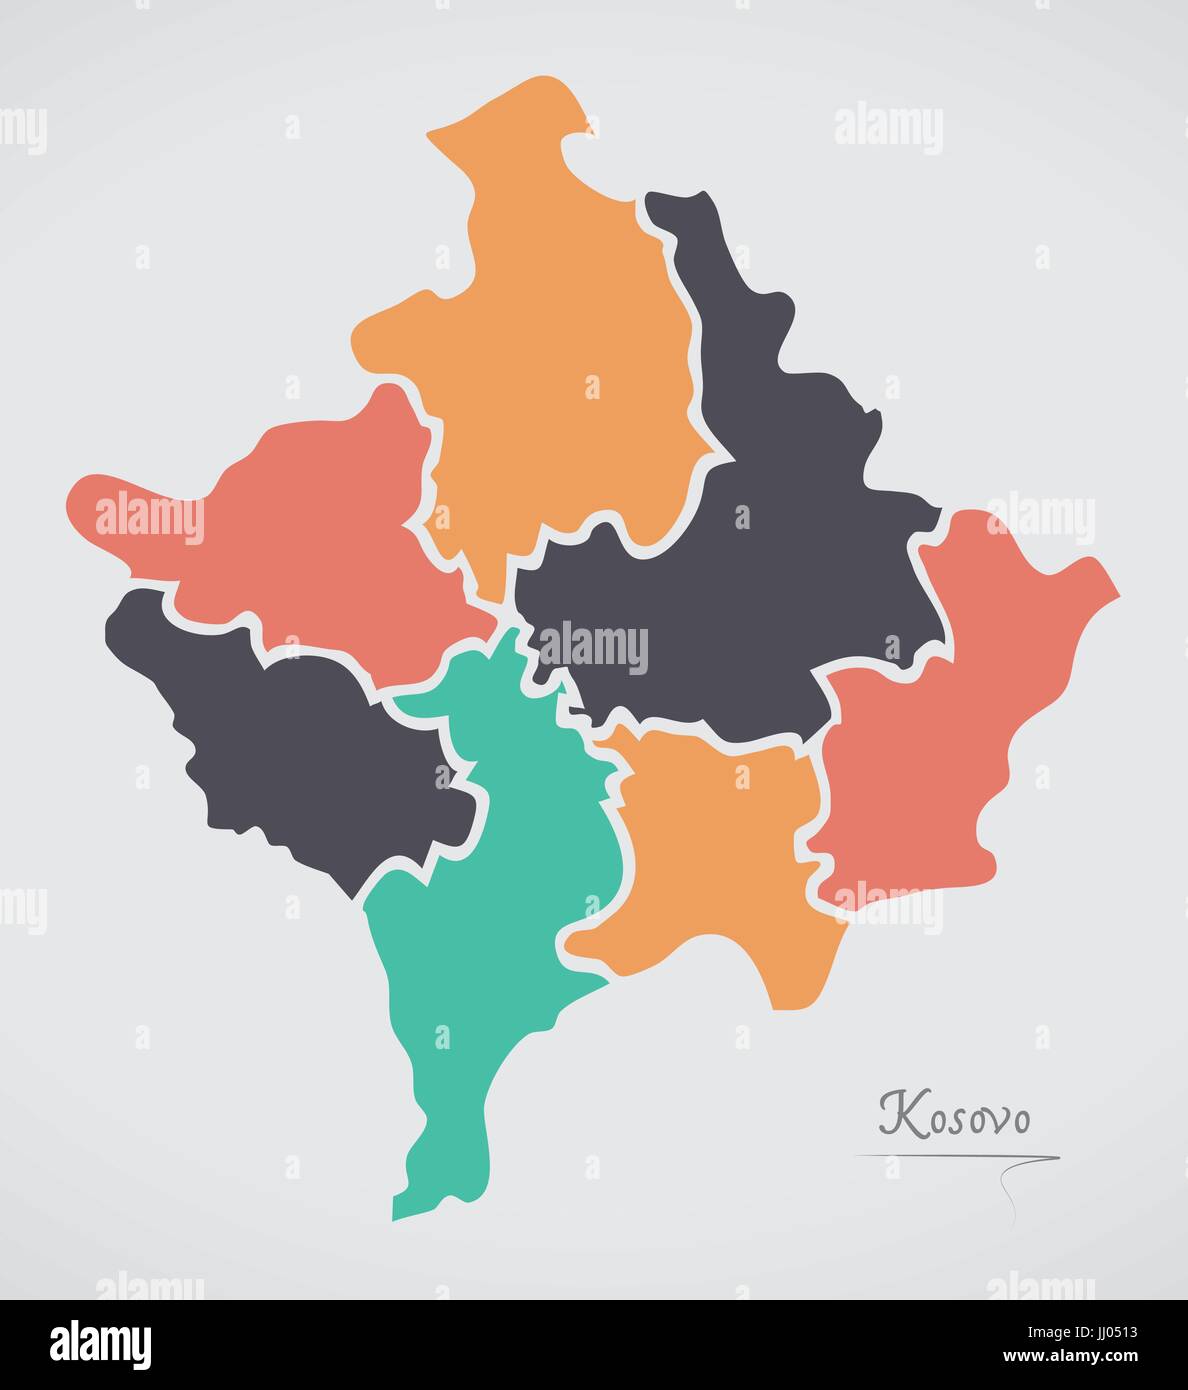 Kosovo Map with states and modern round shapes Stock Vector